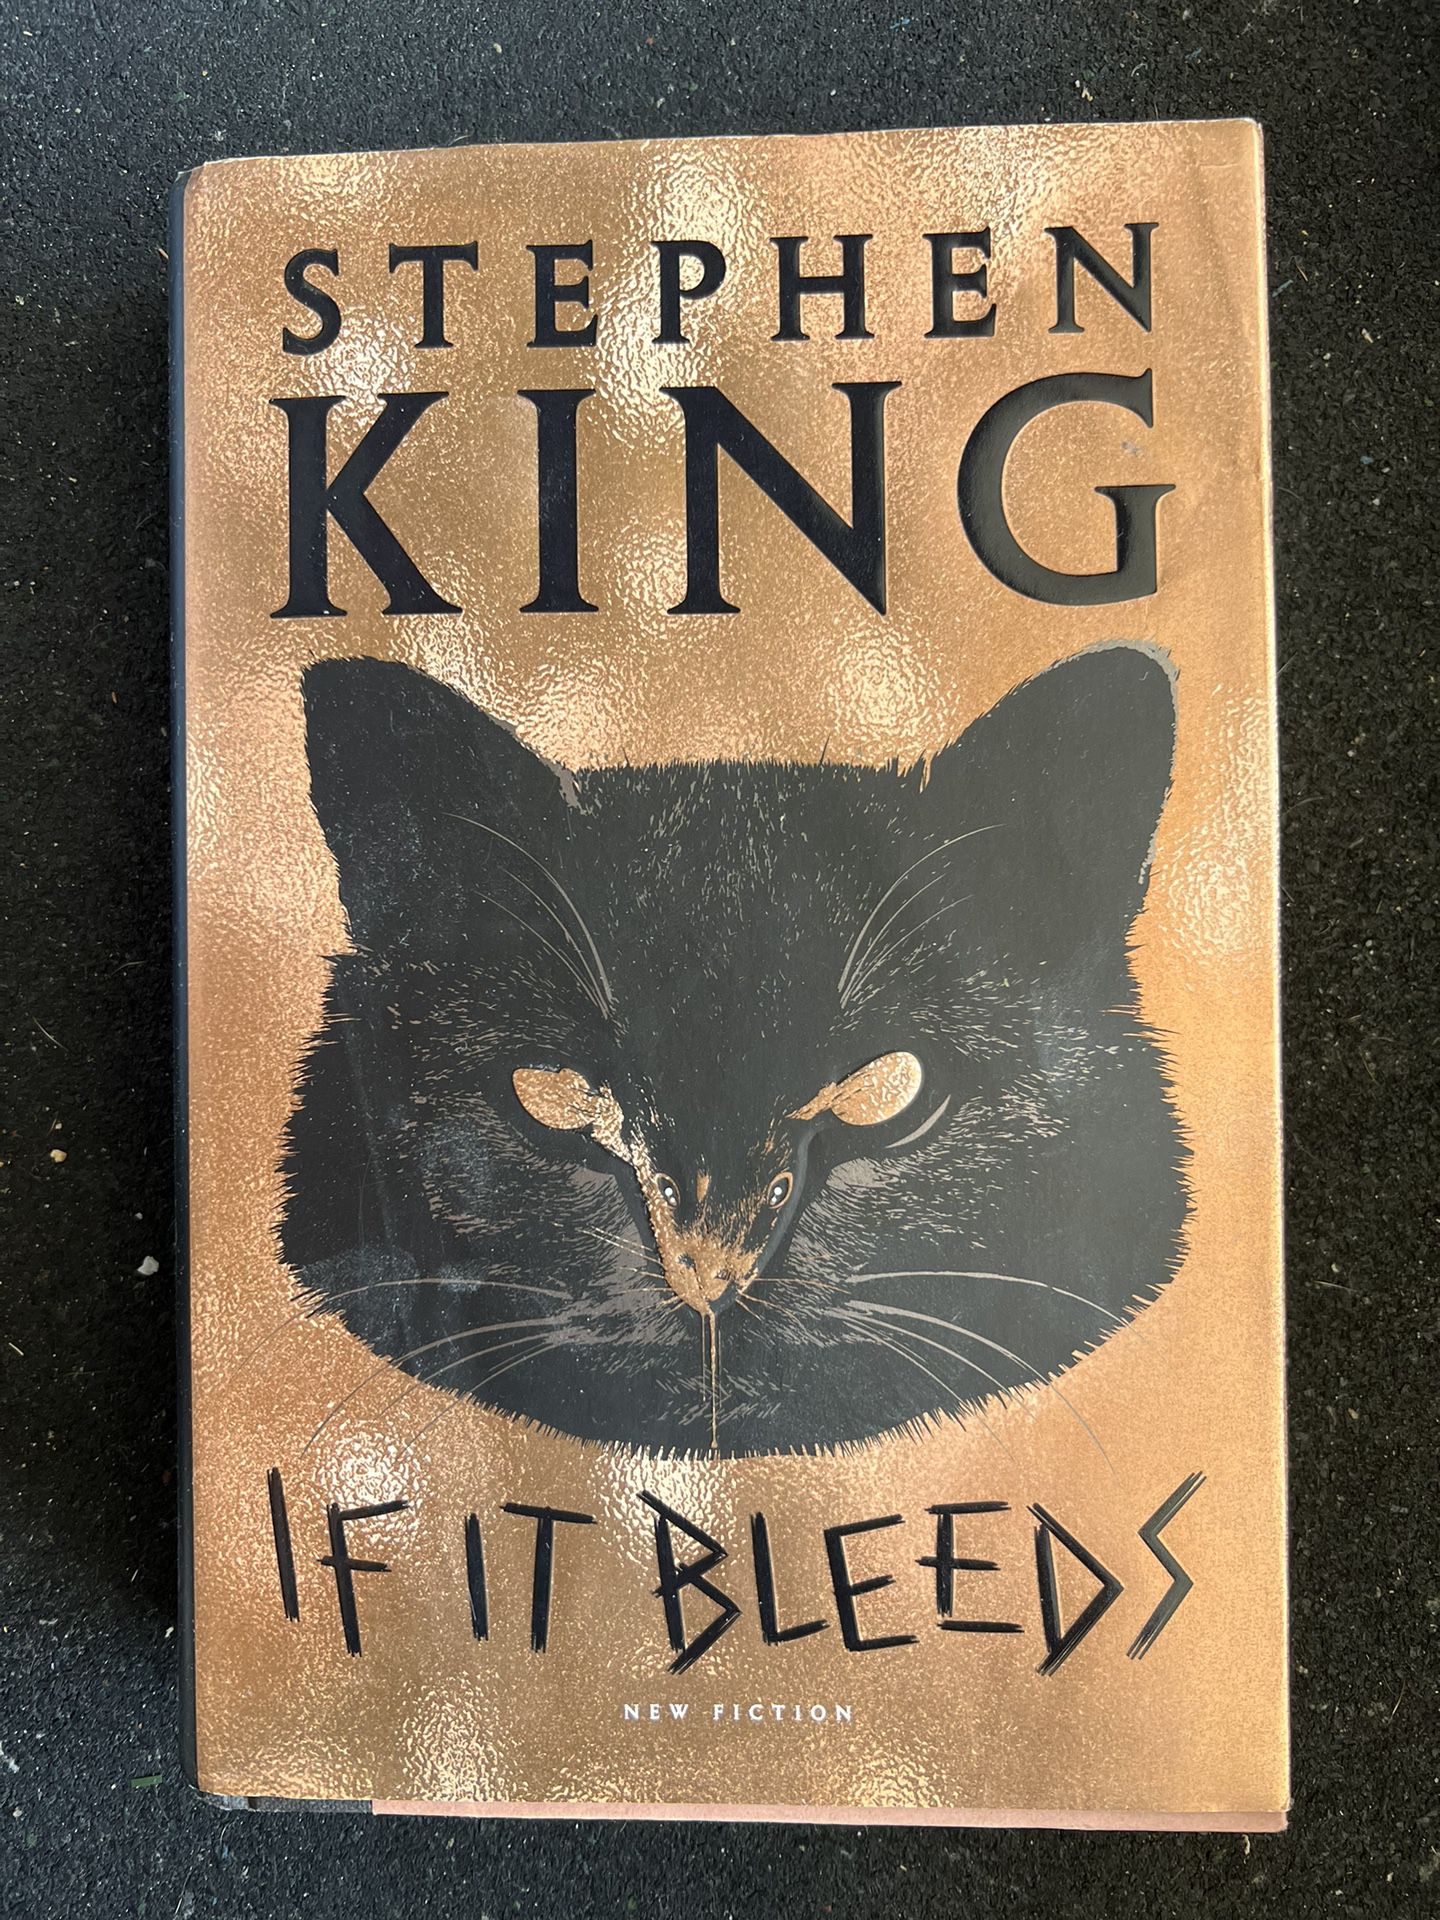 If It Bleeds By Stephen King